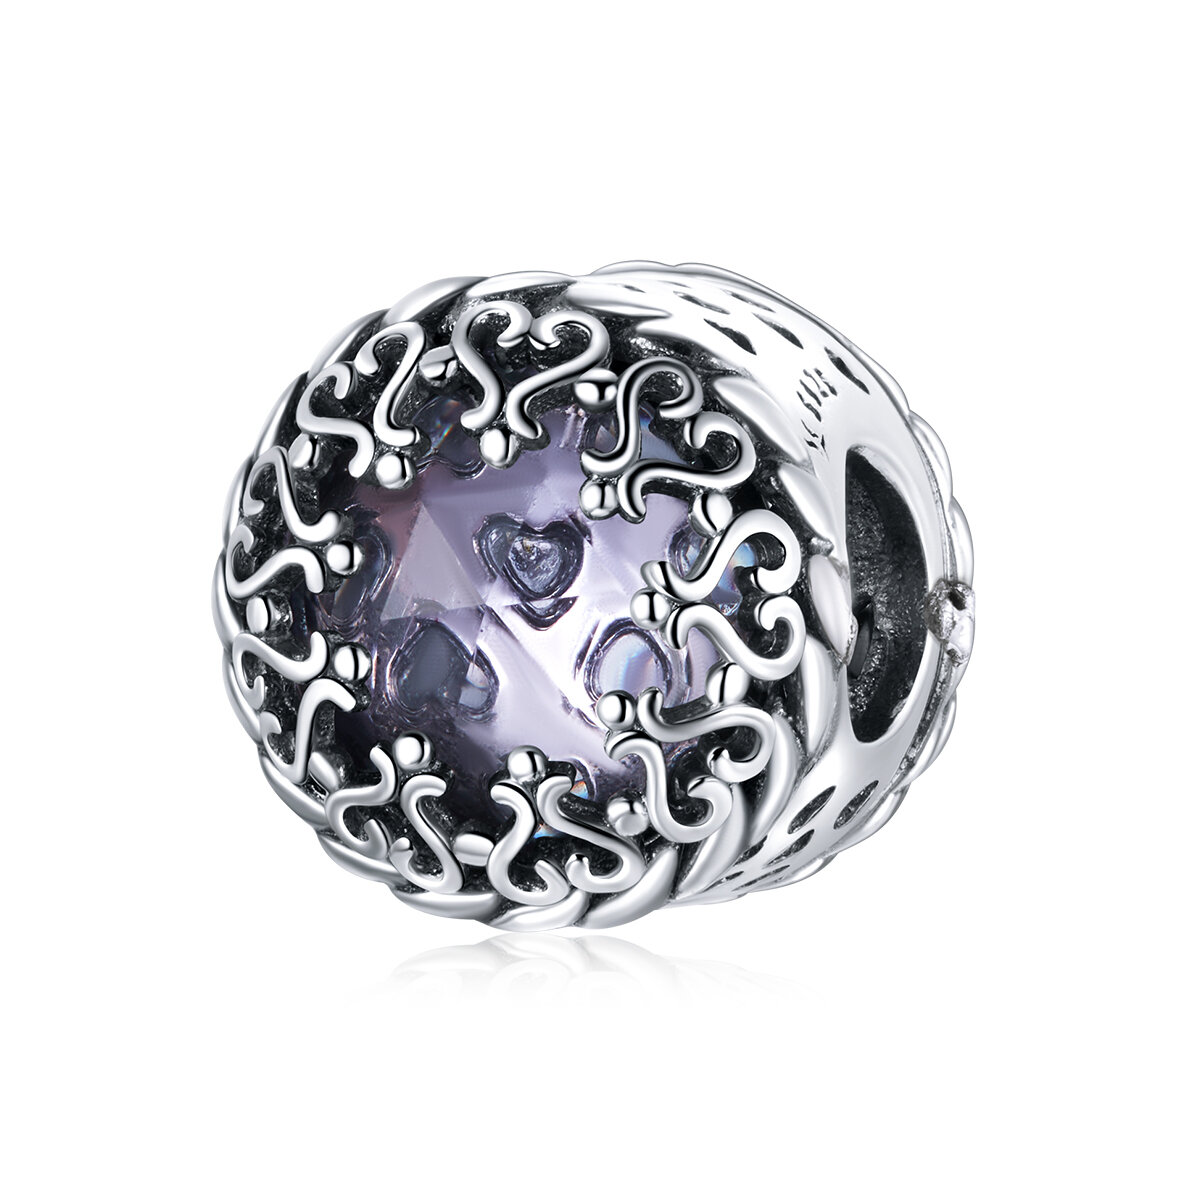 GemKing SCC1791 Eternal beauty lasts Forever S925 Sterling Silver Charm